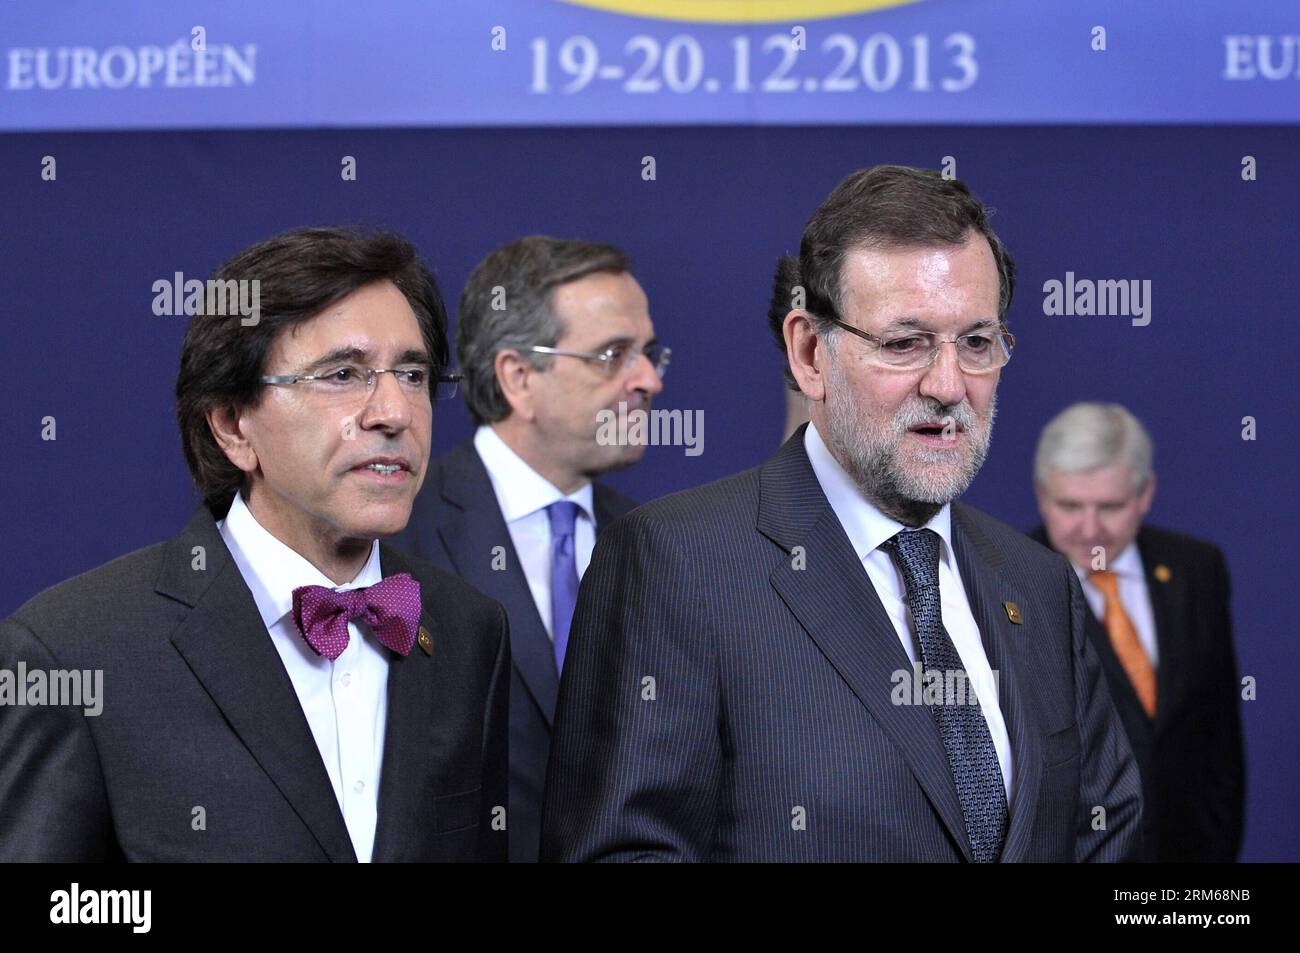 (131219) -- BRUSSELS, Dec. 19, 2013 (Xinhua) -- Spanish Prime Minister Mariano Rajoy (R) talks with Belgian Prime Minister Elio Di Rupo after the group photo session on the sidelines of the European Union (EU) Summit in Brussels, capital of Belgium, Dec. 19, 2013. European Union leaders convened in Brussels Thursday for a two-day summit with economy set to top the agenda. (Xinhua/Zhou Lei) BELGIUM-BRUSSELS-EU SUMMIT-GROUP PHOTO PUBLICATIONxNOTxINxCHN   Brussels DEC 19 2013 XINHUA Spanish Prime Ministers Mariano Rajoy r Talks With Belgian Prime Ministers Elio Tue Rupo After The Group Photo Sess Stock Photo